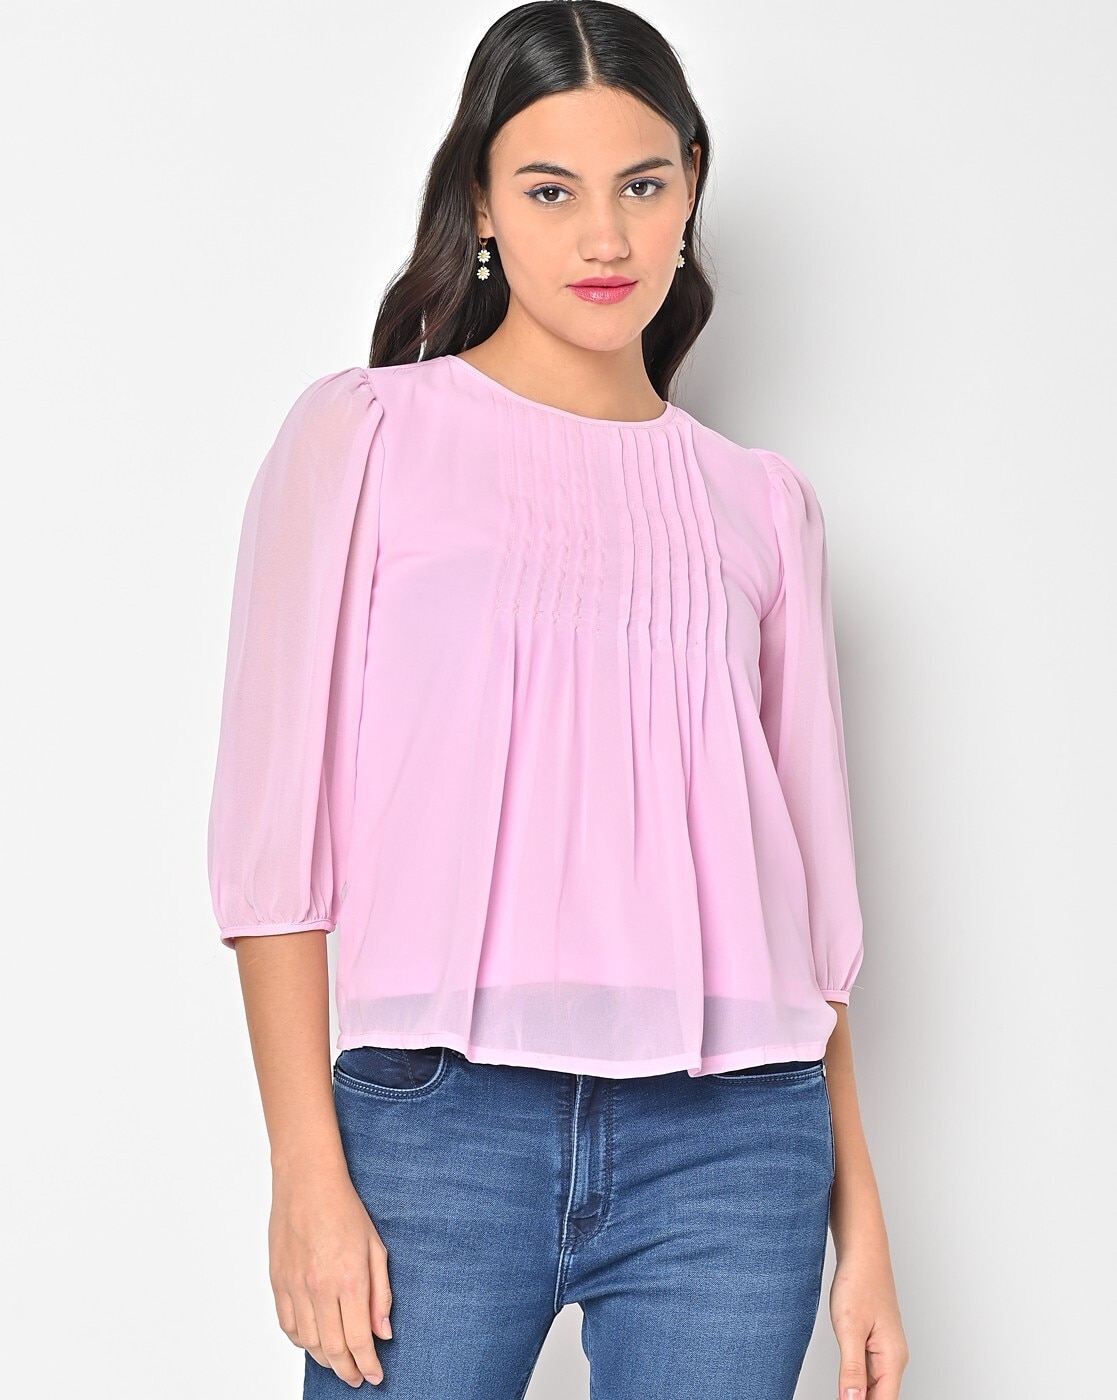 Buy Pink Tops for Women by AND Online